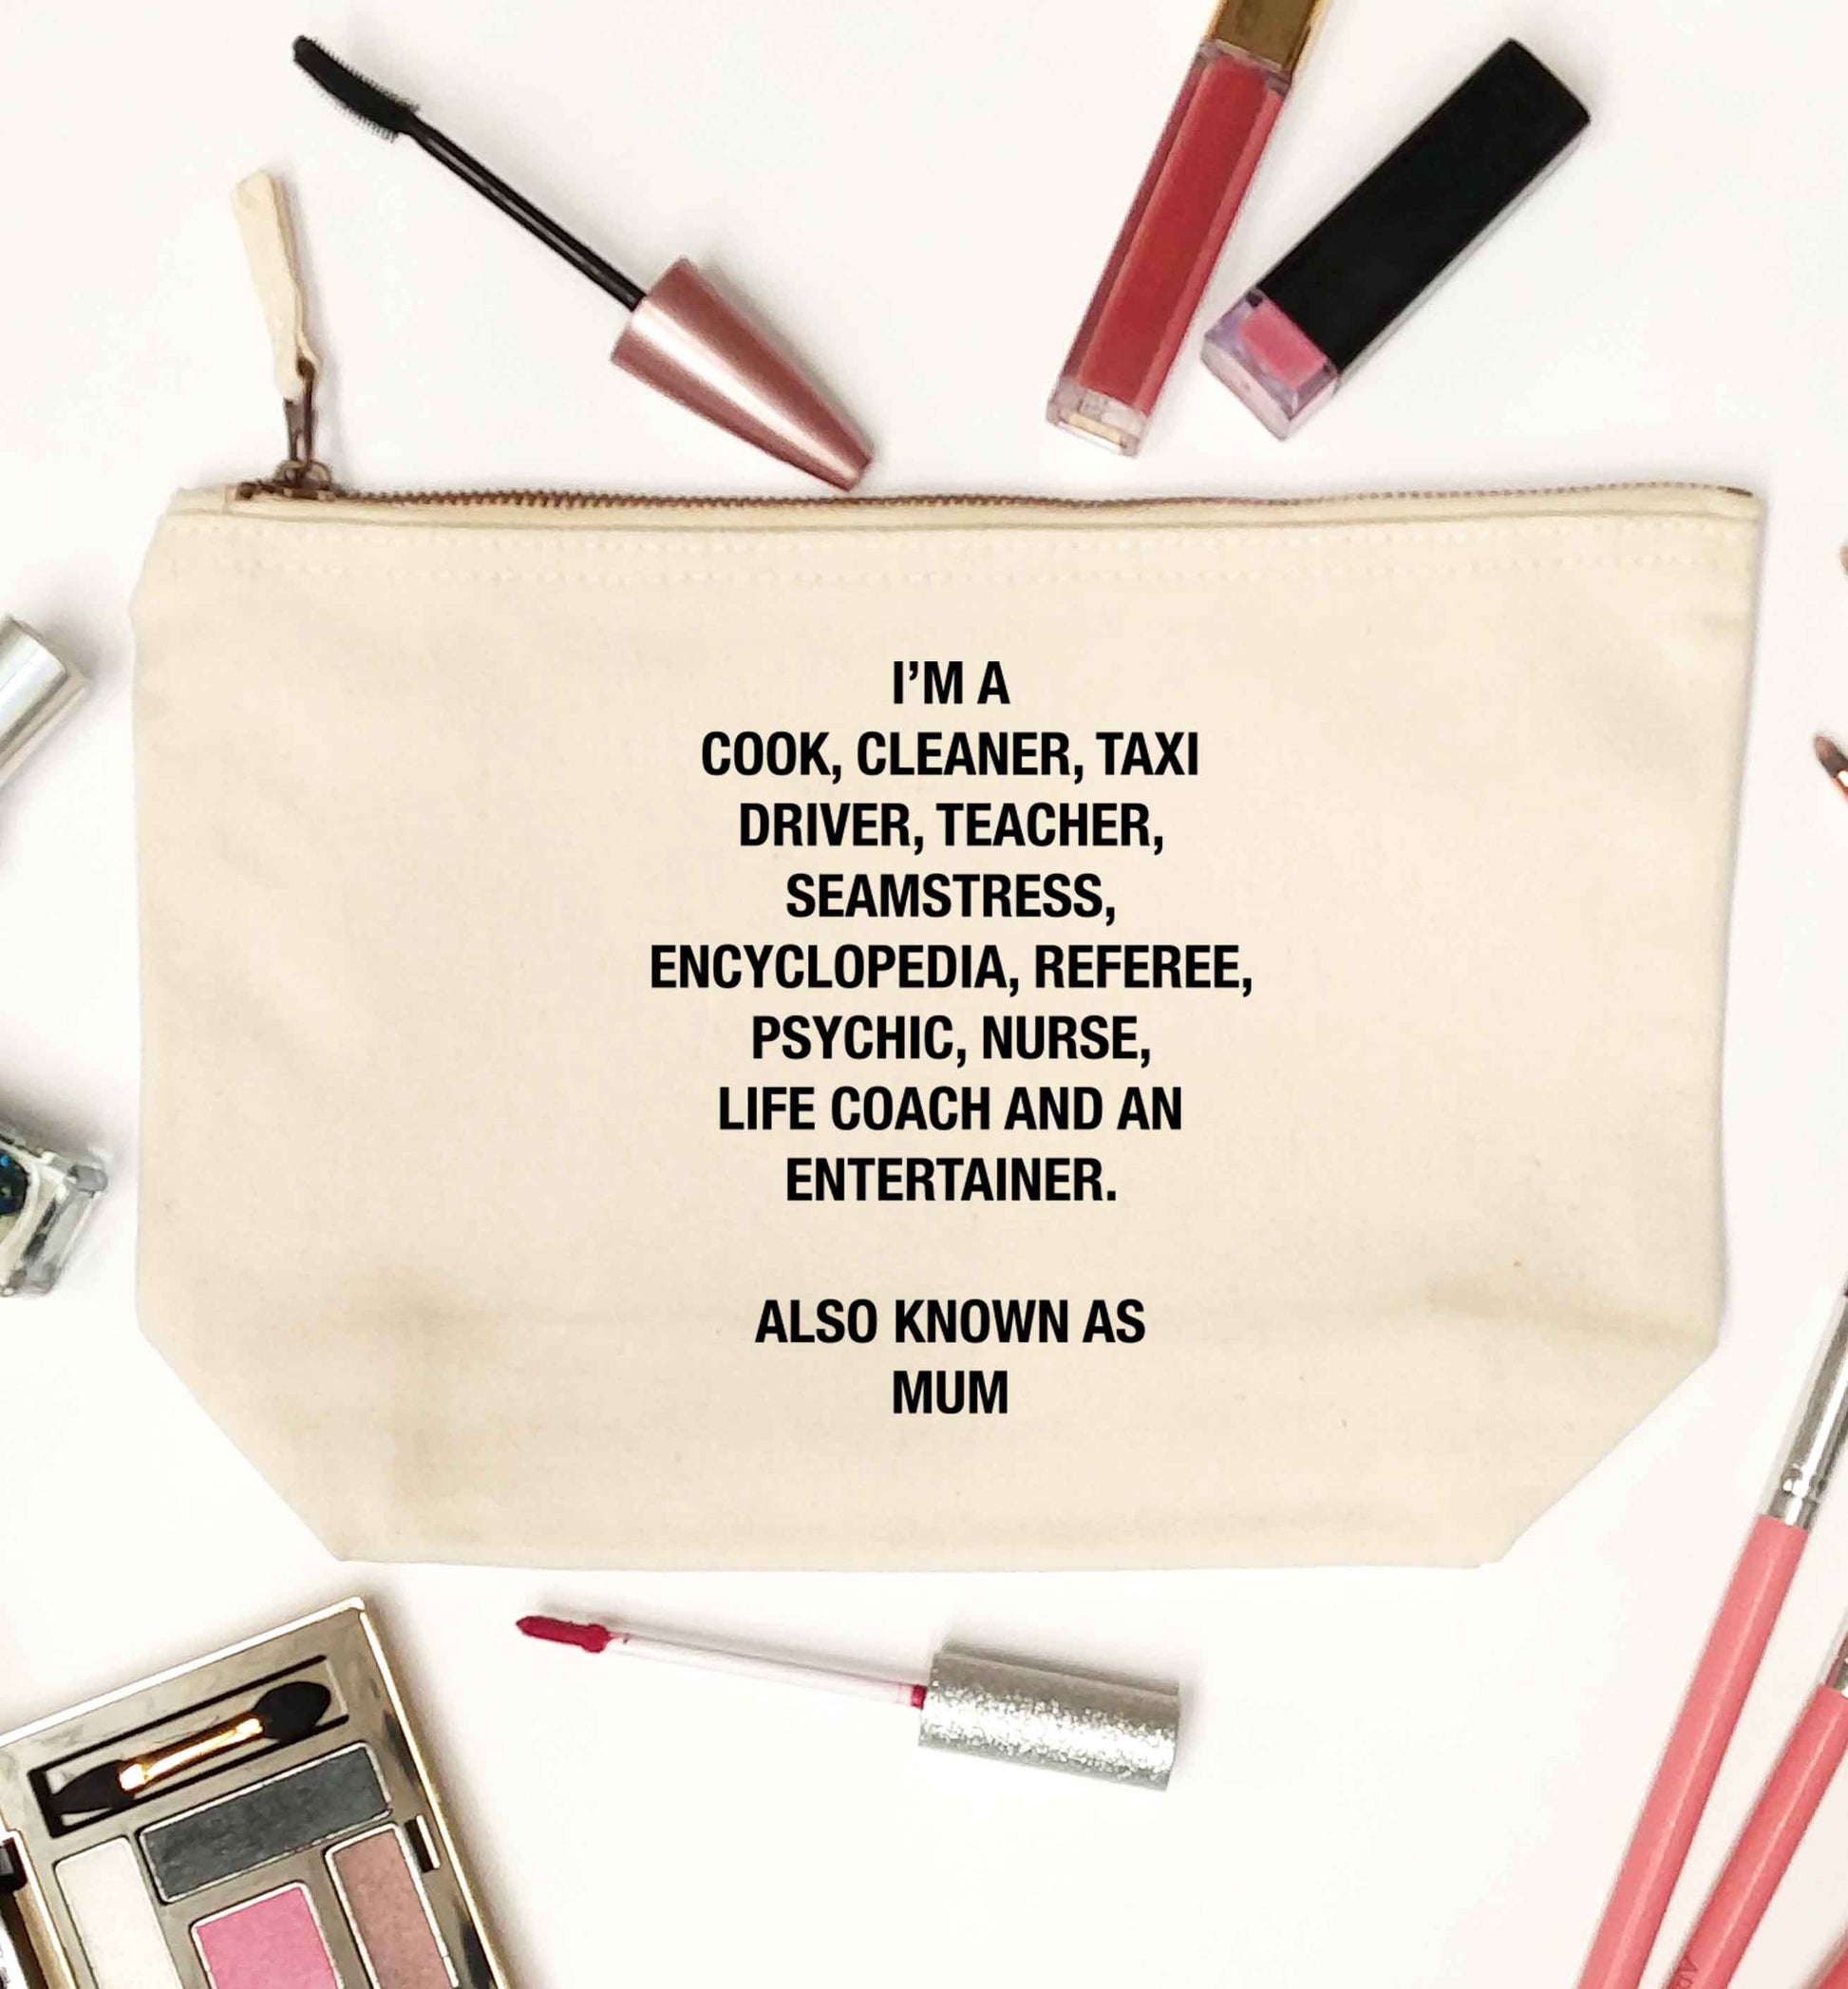 Funny gifts for your mum on mother's dayor her birthday! Mum, cook, cleaner, taxi driver, teacher, seamstress, encyclopedia, referee, psychic, nurse, life coach and entertainer natural makeup bag